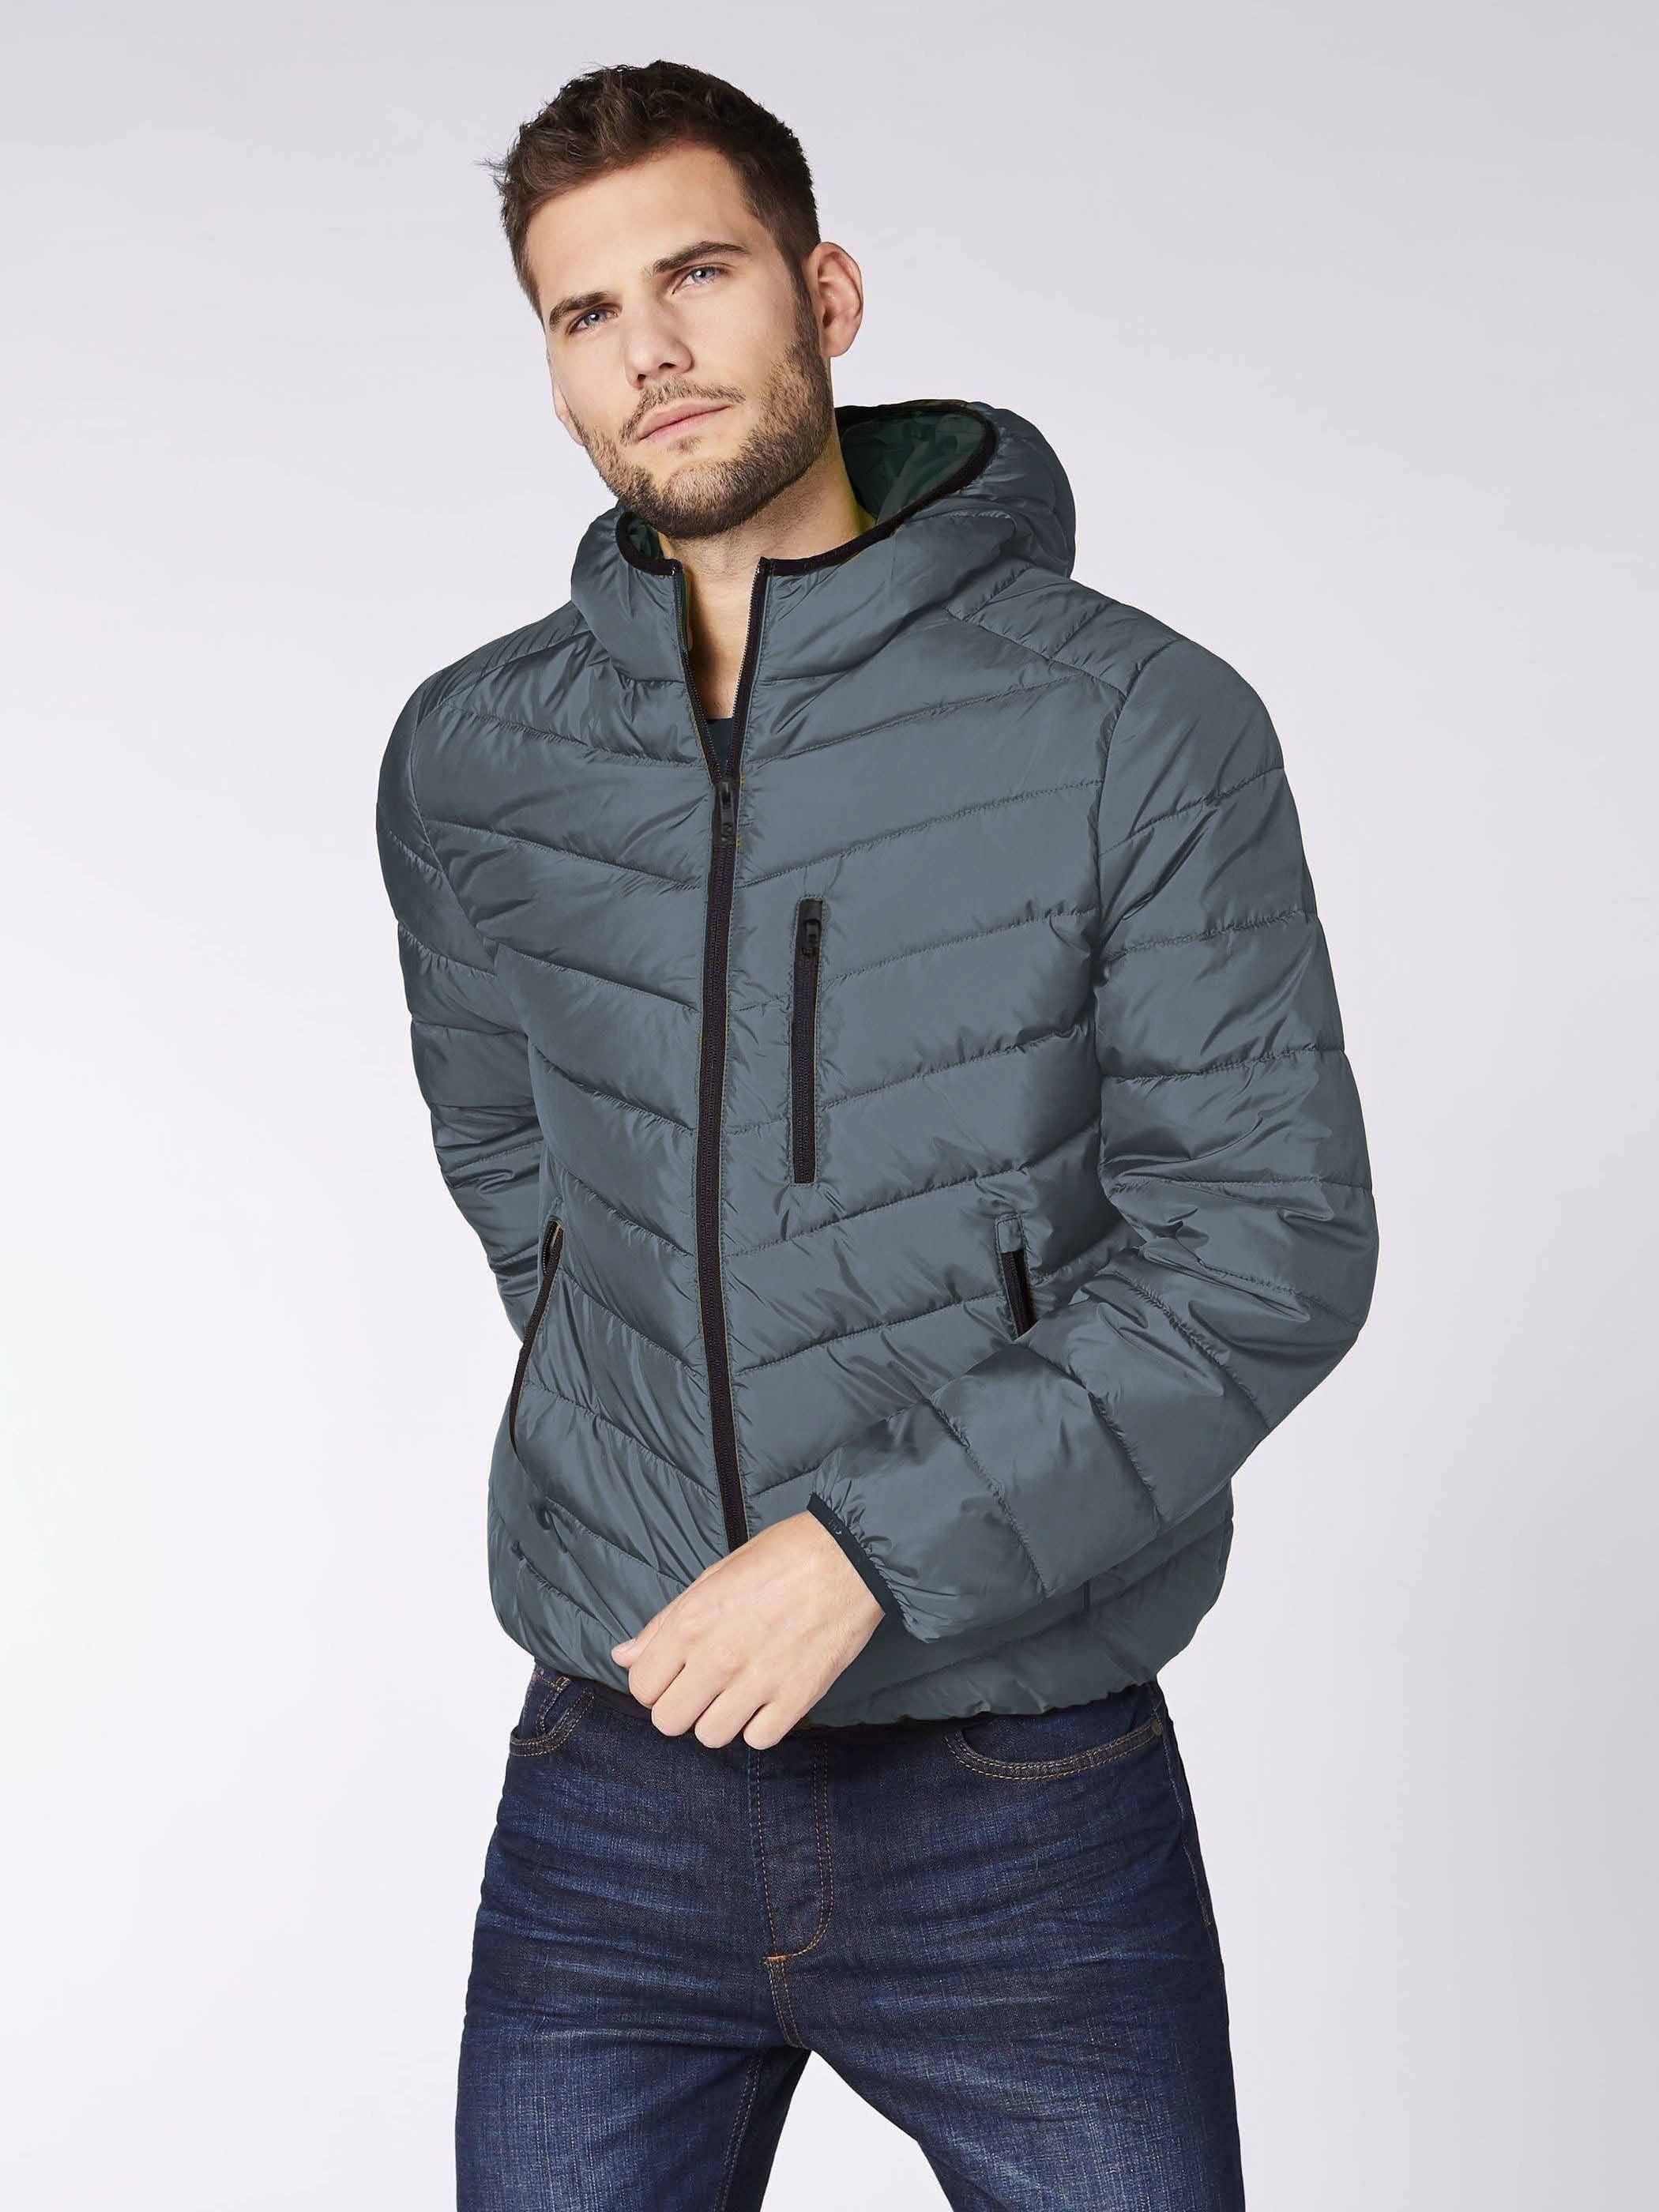 Men's Plus Size Solid Chevron Hooded Puffer Coat For Winter, Oversized Thick Padded Outwear For Big & Tall, Bright Neon Green Lining Warm Outwear